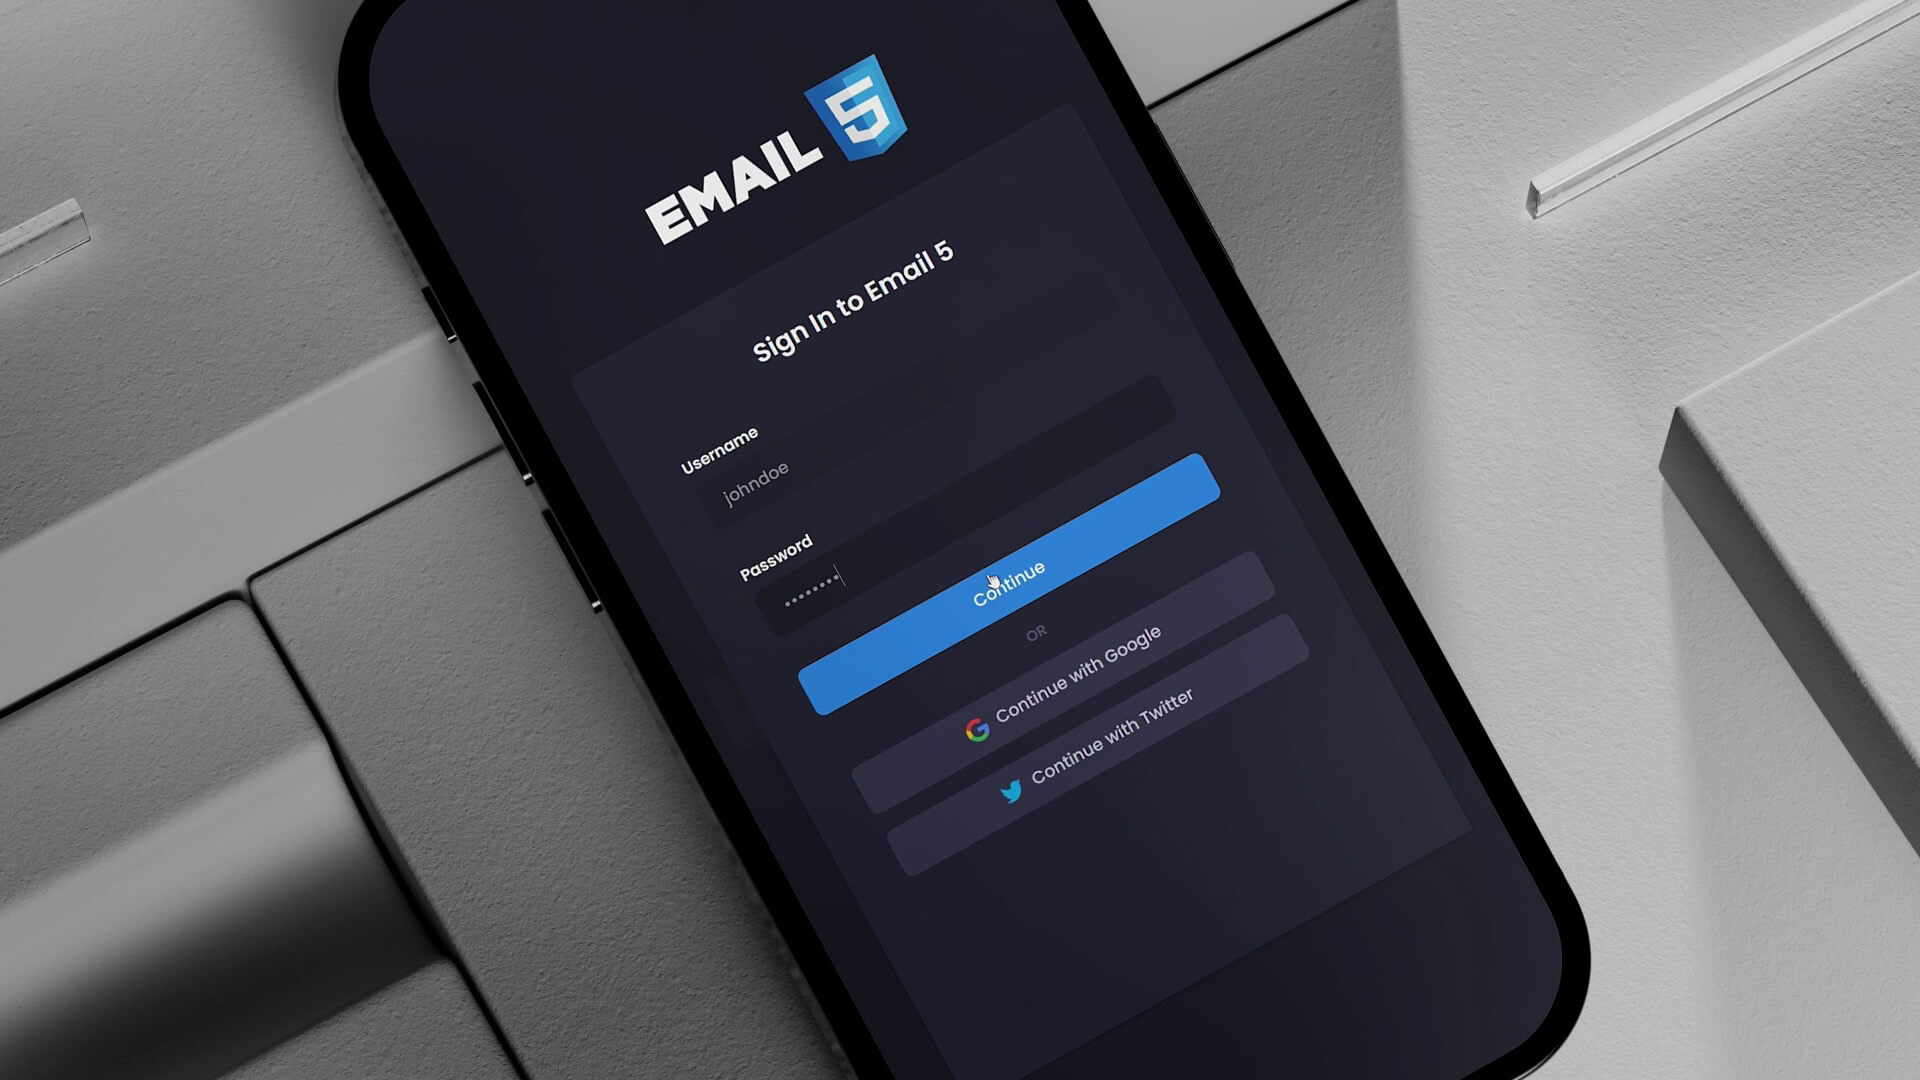 Email 5: The disruptive Web3 mail service transforming email communication.